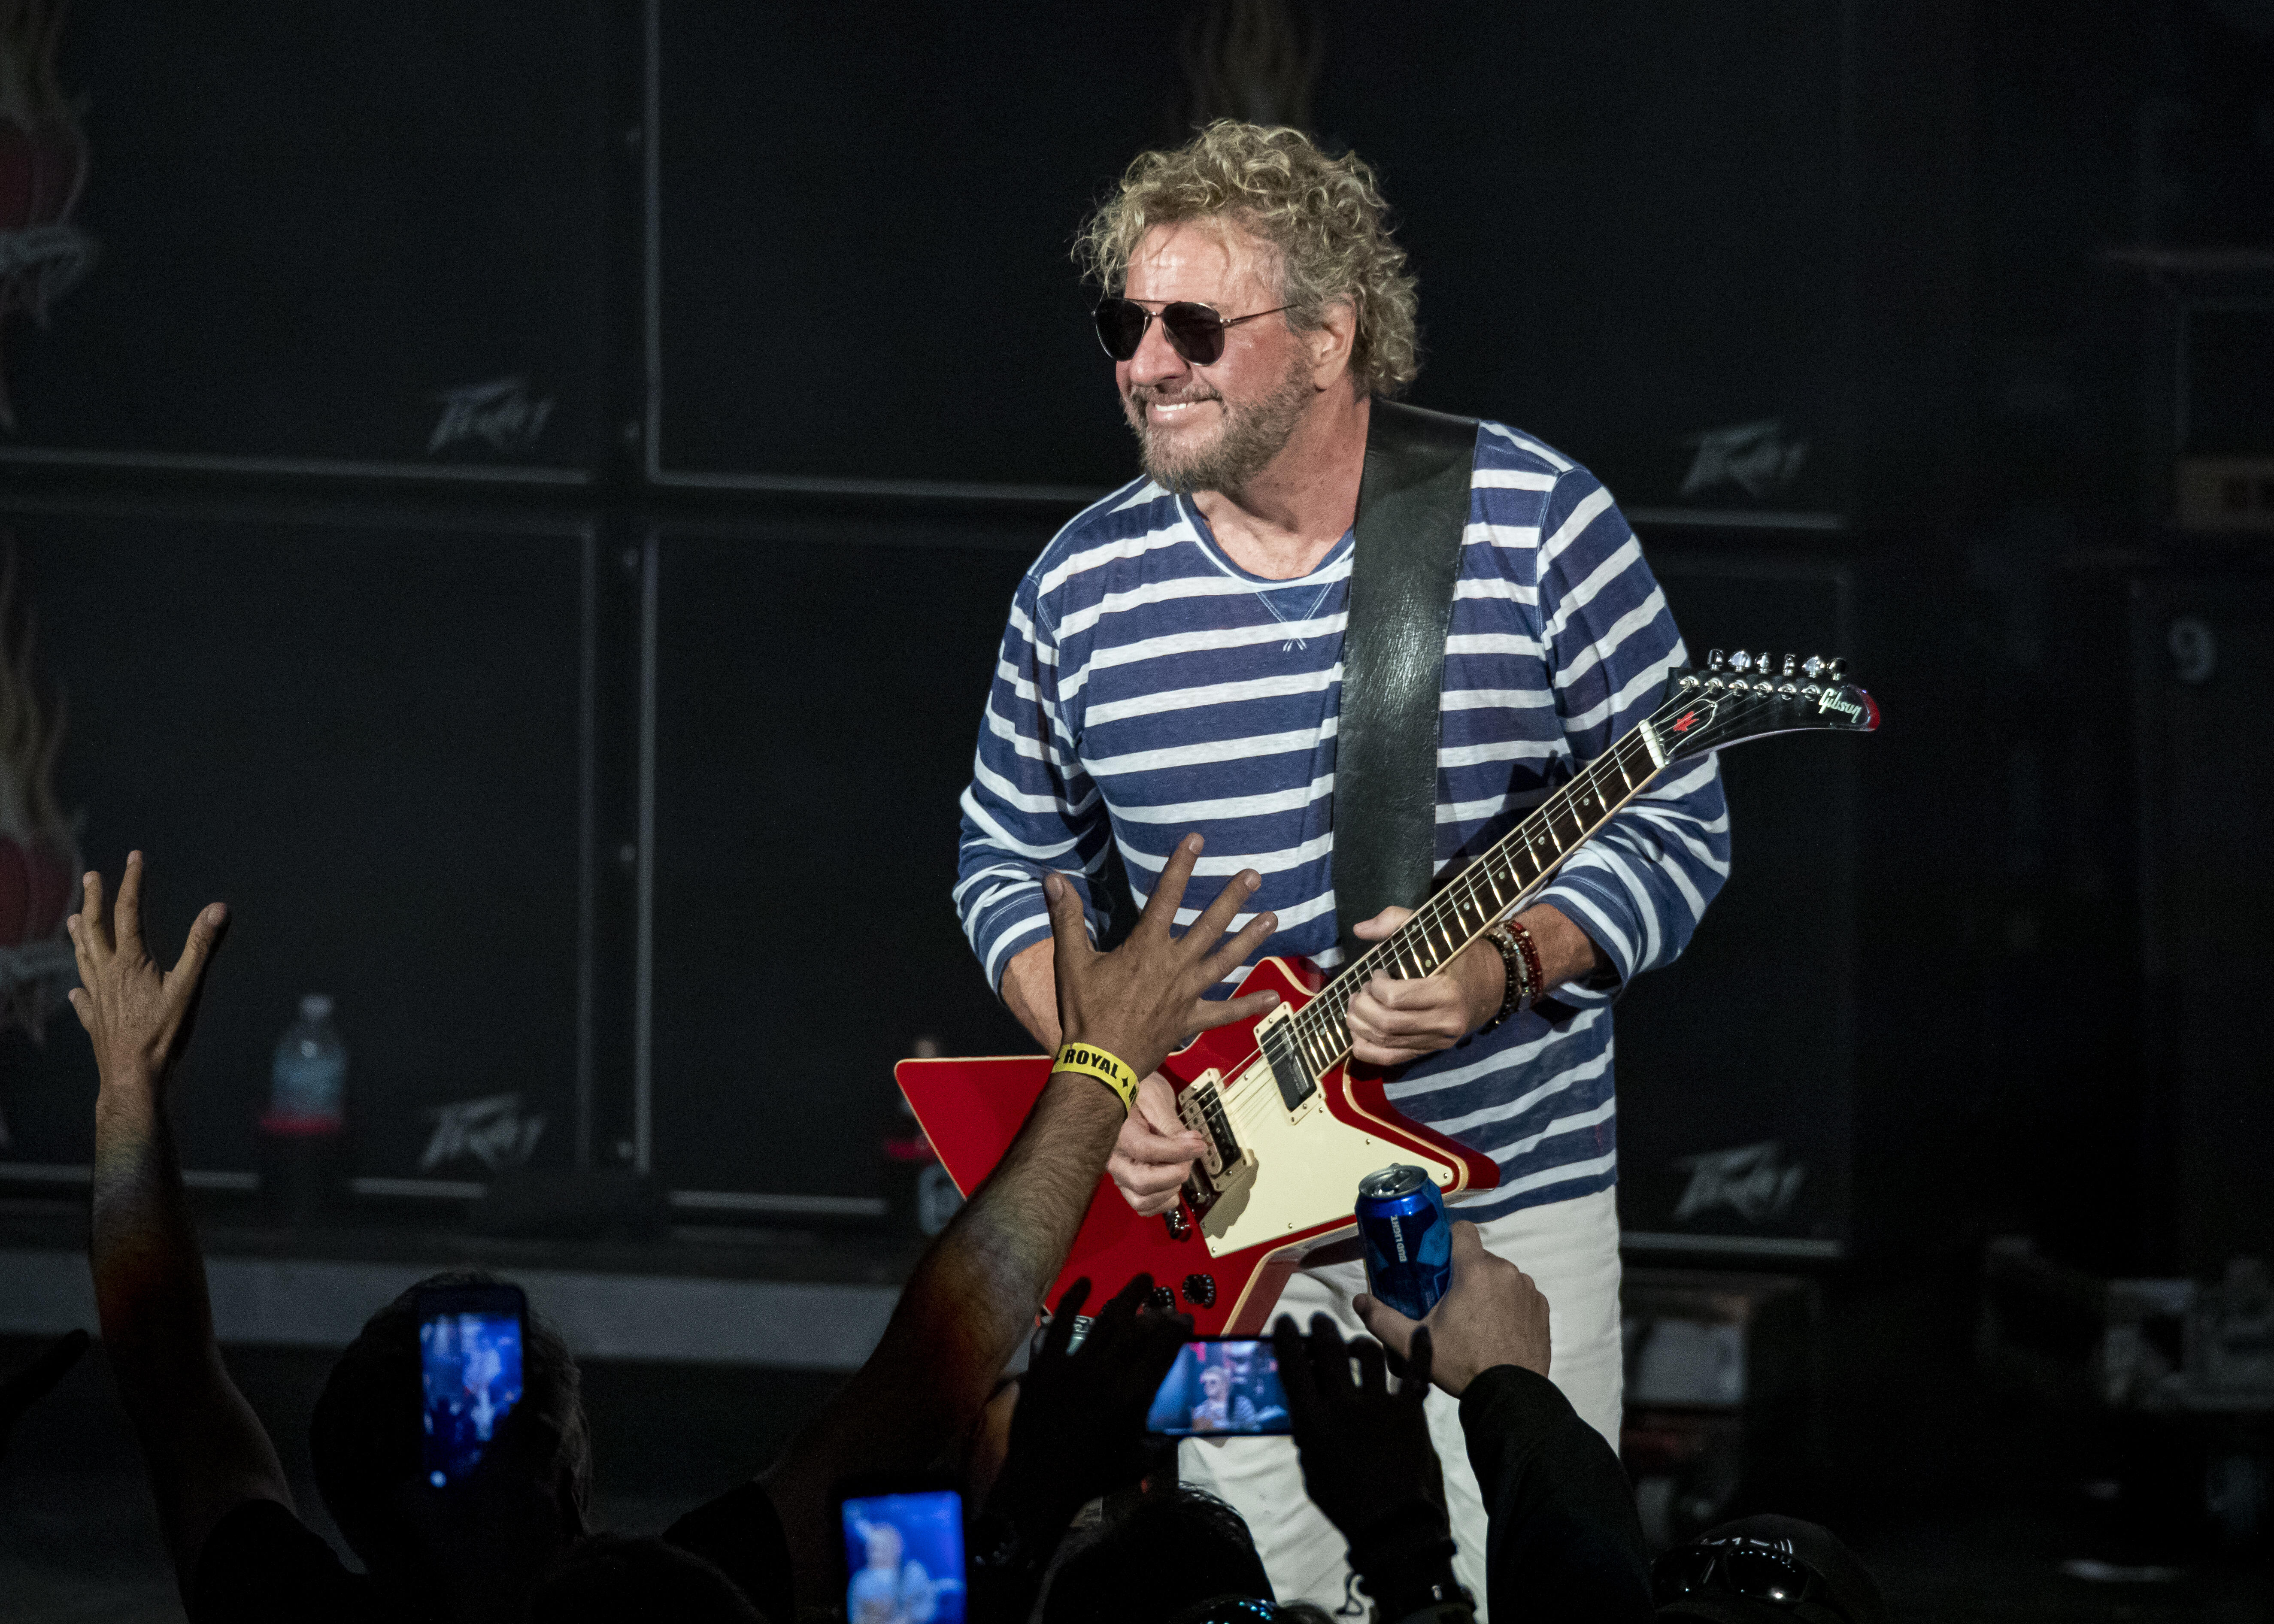 21 Things You Might Not Know About Birthday Boy Sammy Hagar